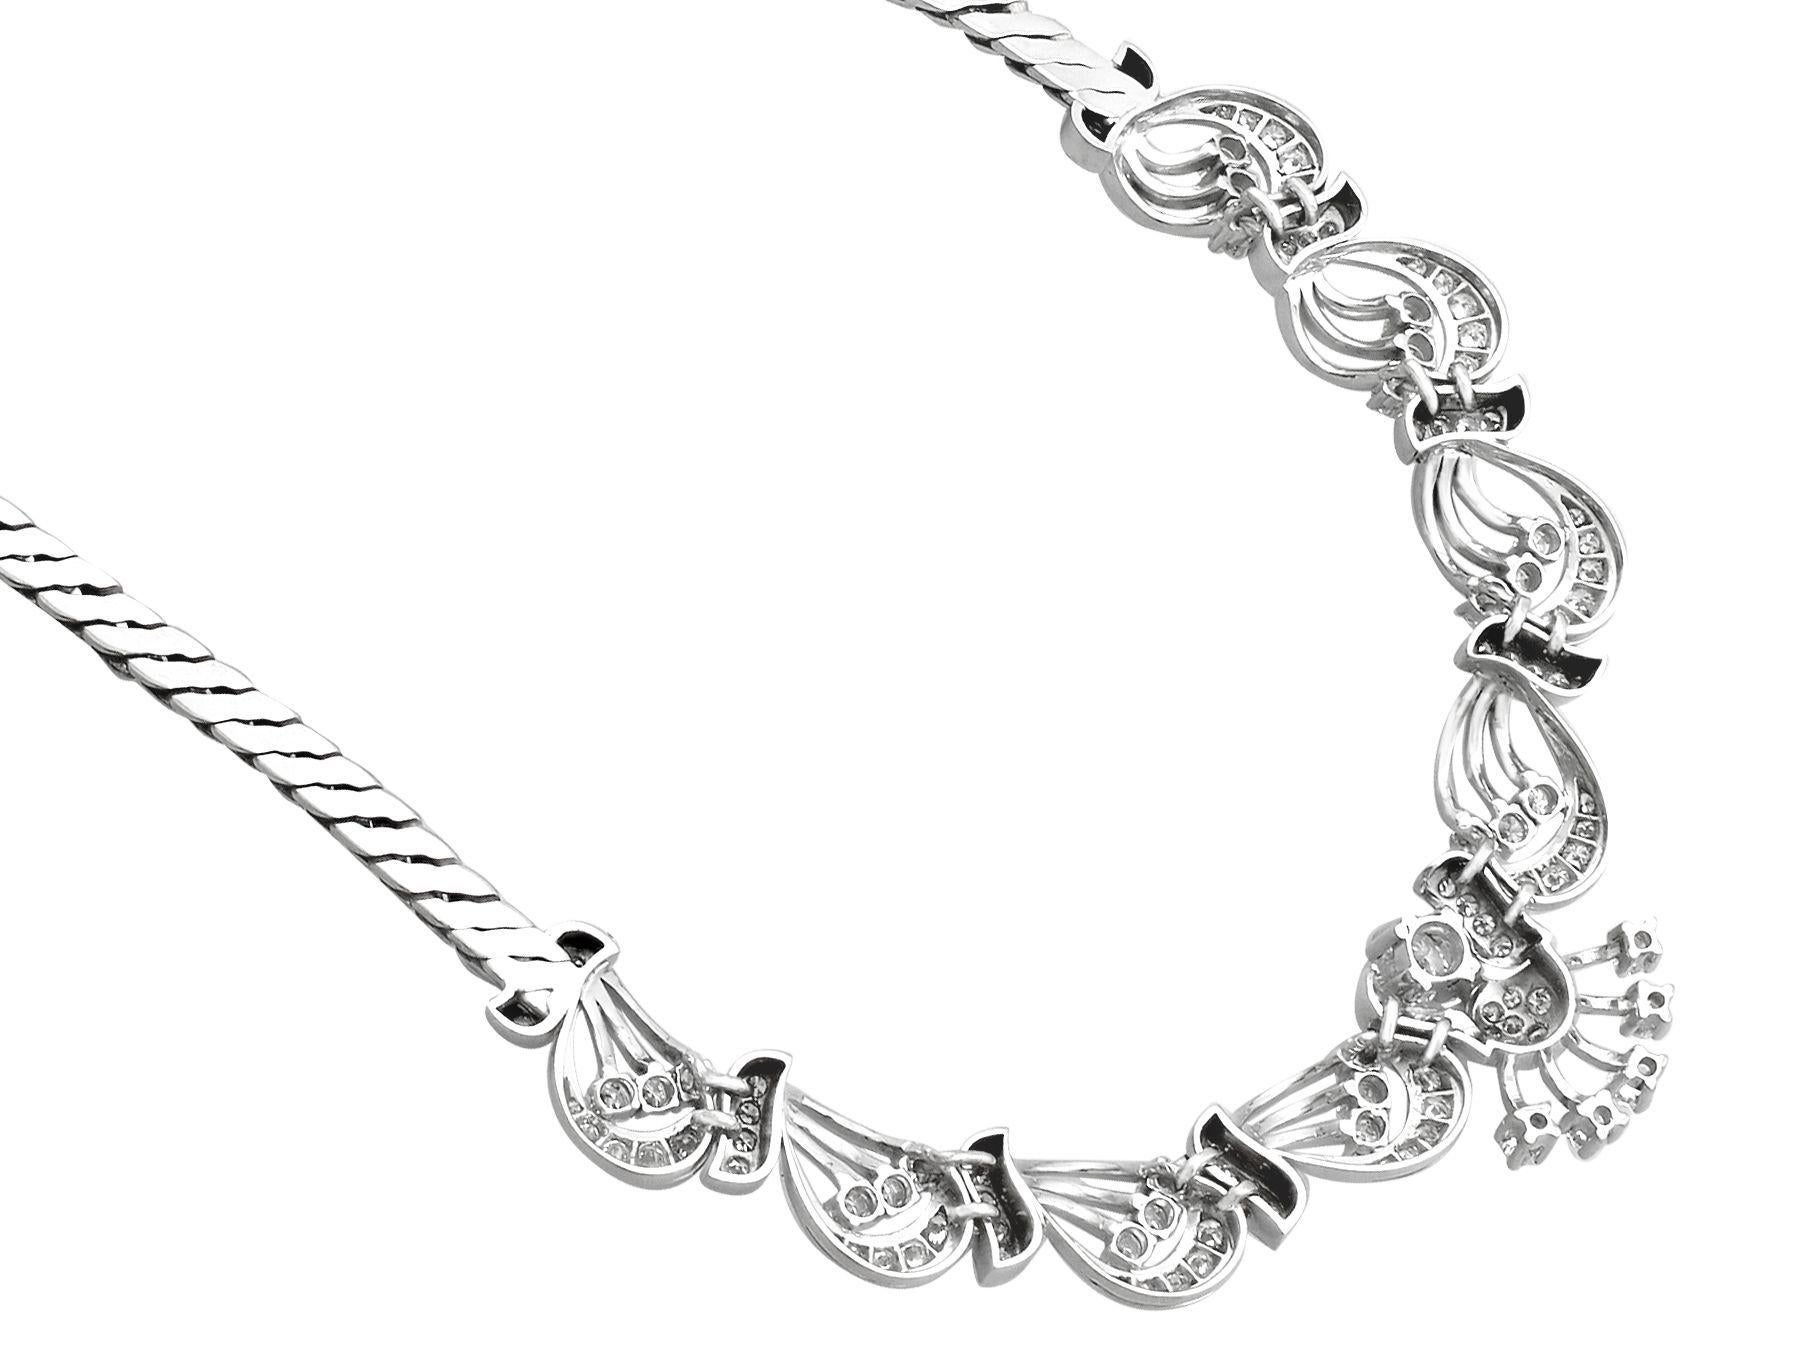 Women's 1960s Vintage 5.57 Carat Diamond and White Gold Necklace For Sale